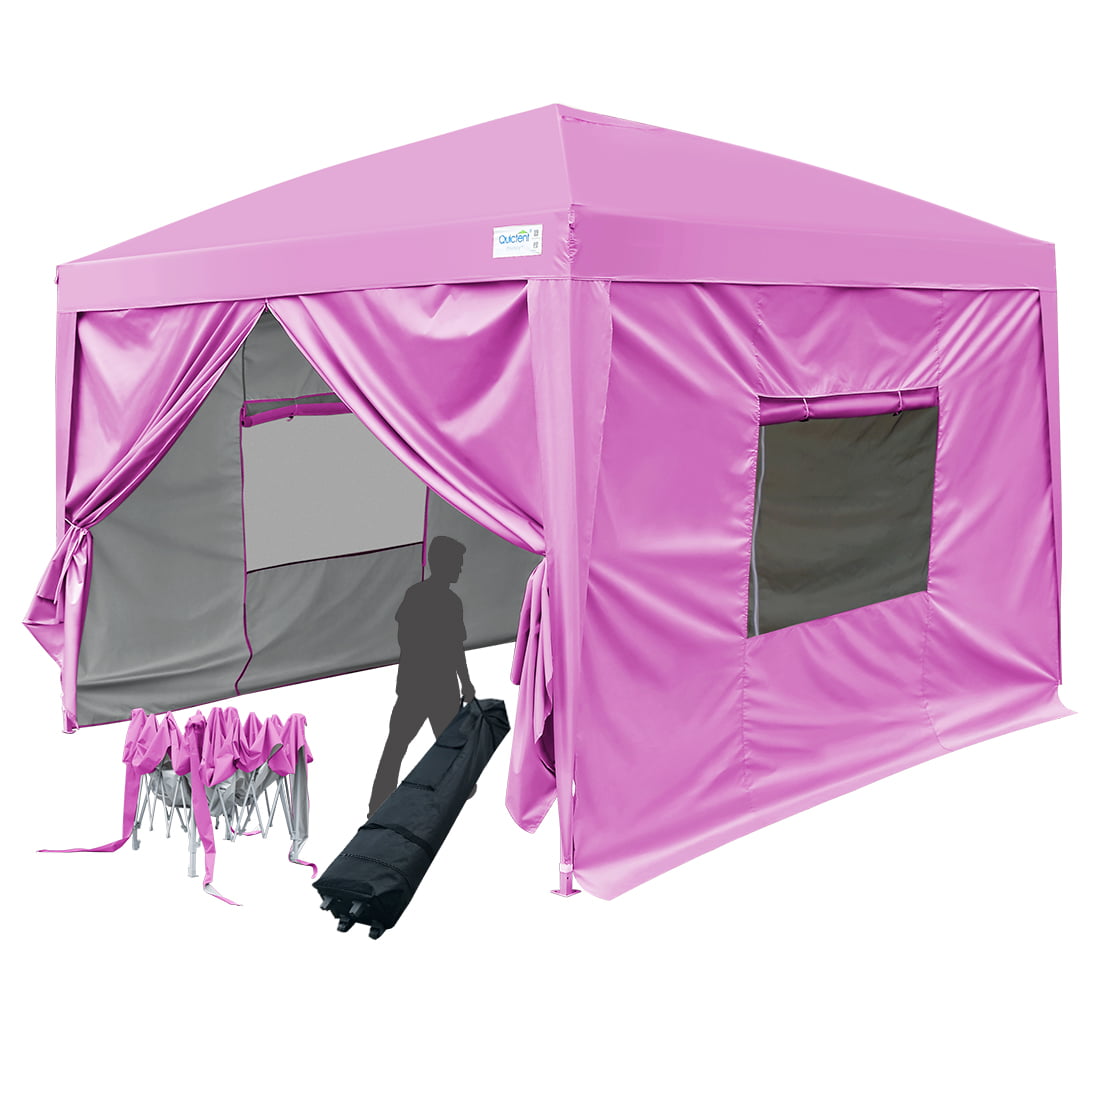 Upgraded Quictent Privacy 8x8 Easy Pop Up Canopy Tent Party Tent Gazebo With Sides And Wheeled Bag Waterproof Pink Walmart Com Walmart Com